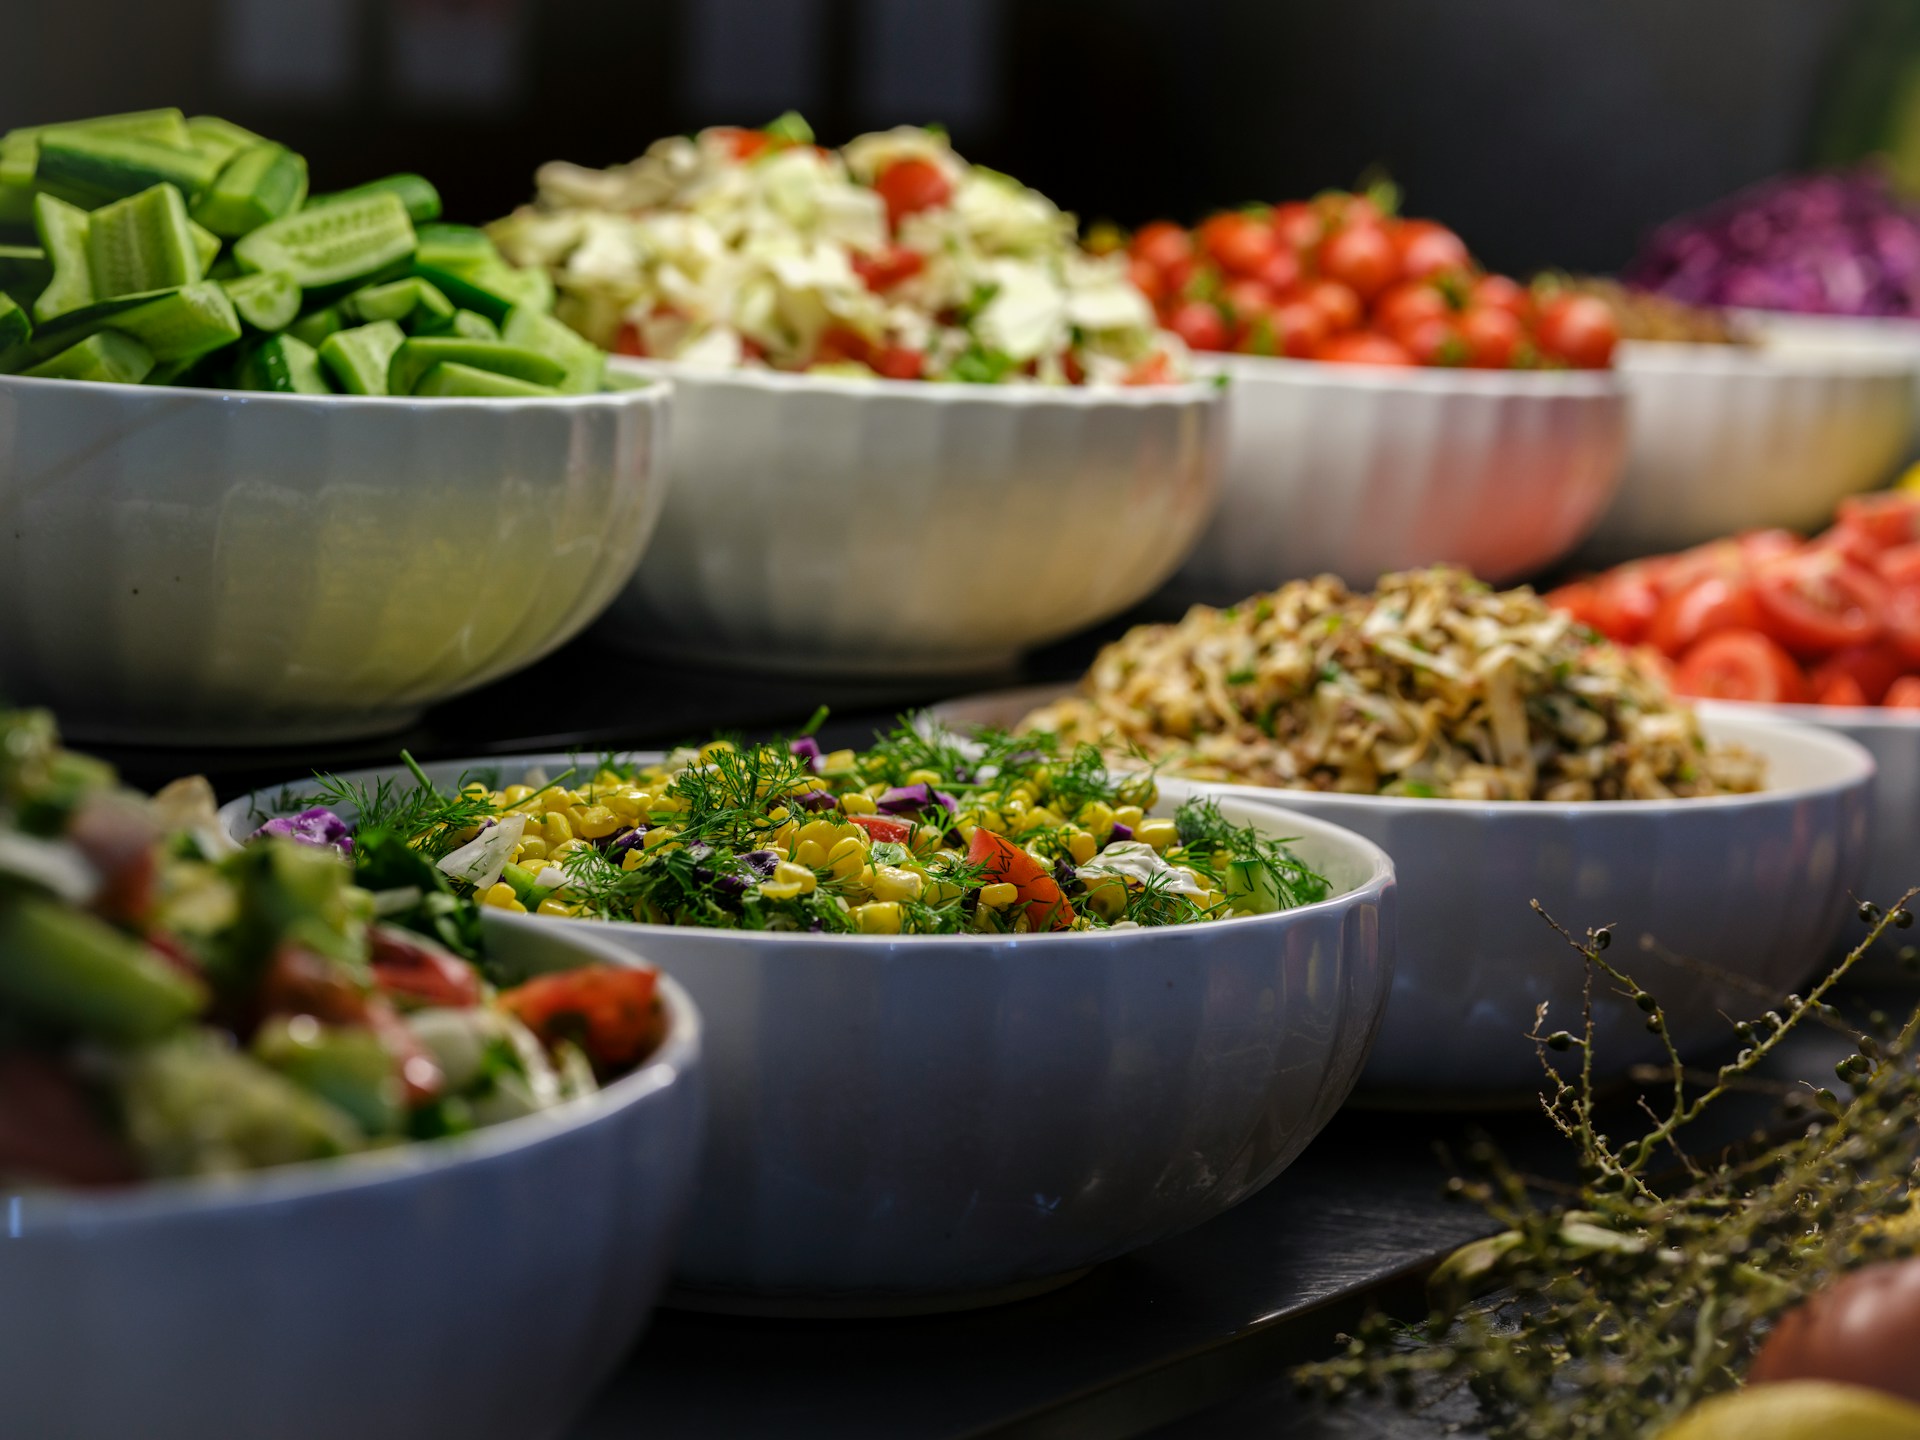 Mastering Dietary Restrictions in Catering: Tips to Please All Guests